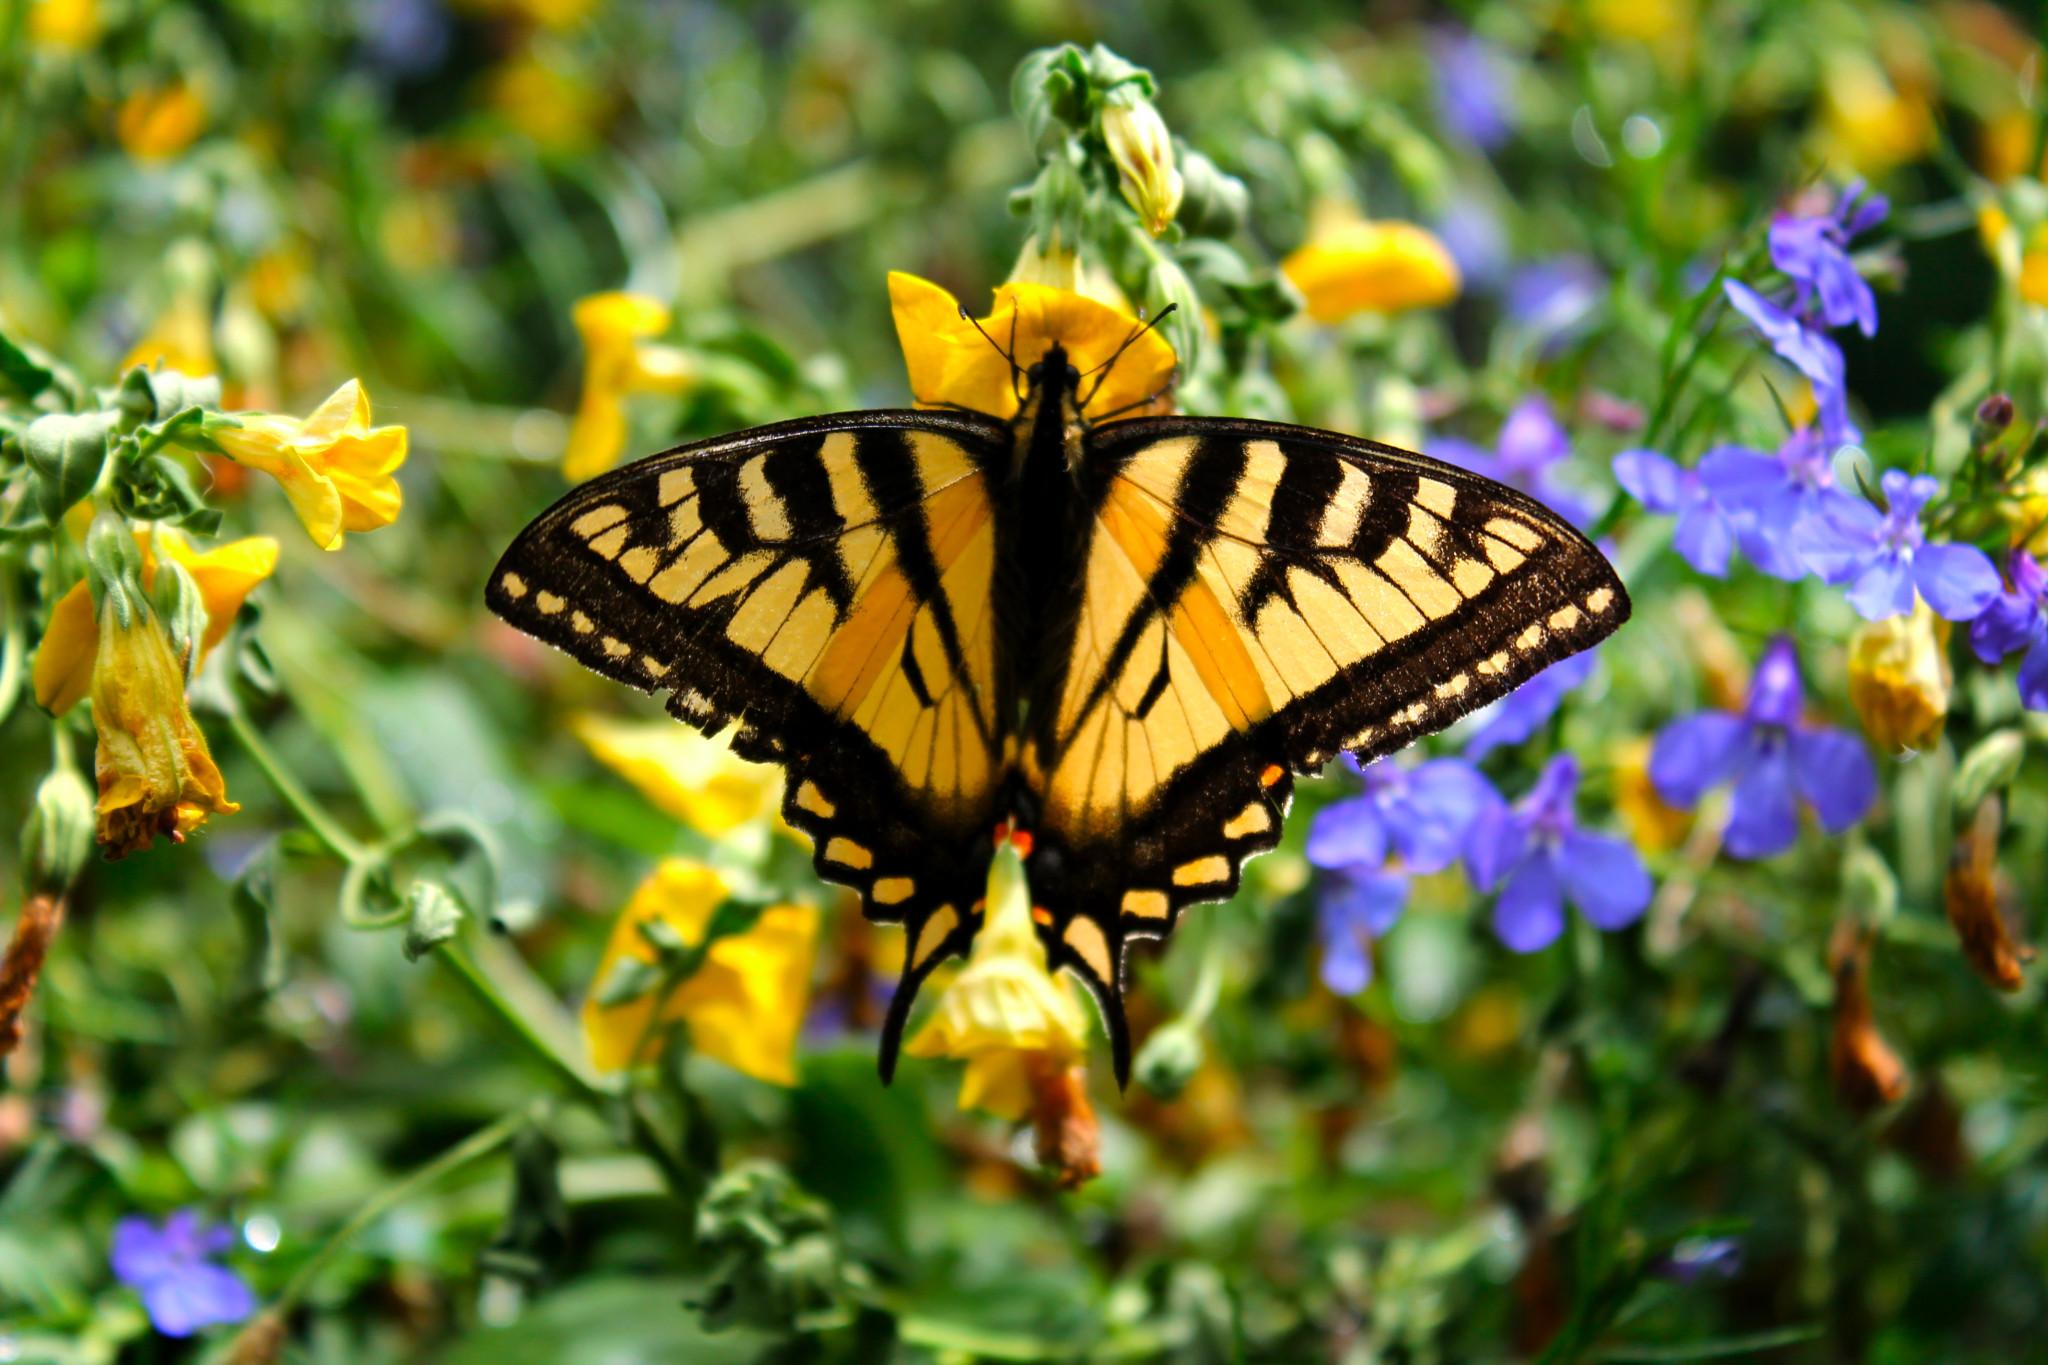 A Tiger Swallowtail butterfly pollinates colorful yellow and purple flowers